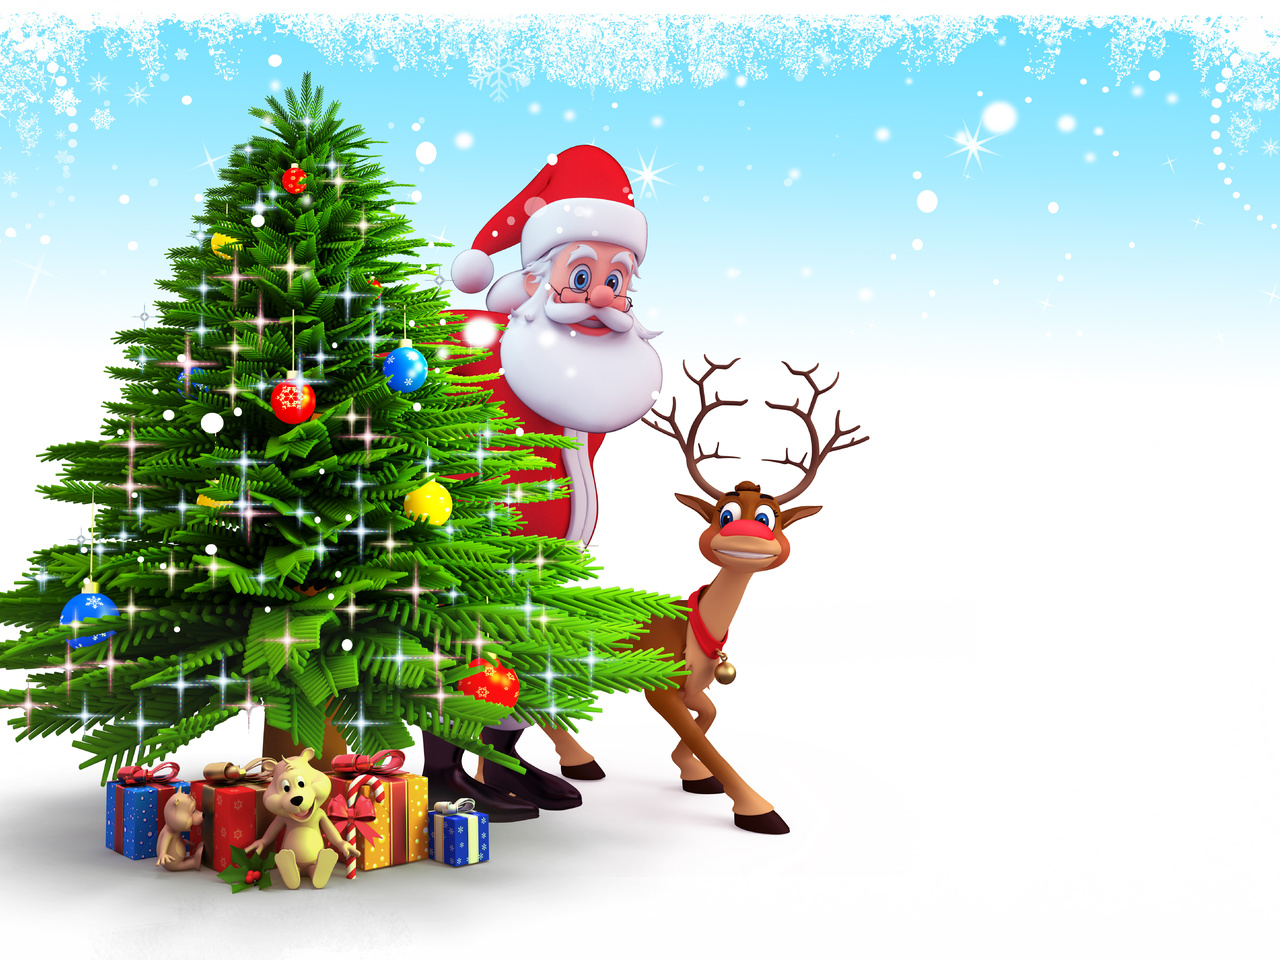 Christmas, 3d, reindeer, gifts, new year, santa claus, snow, , christmas tree